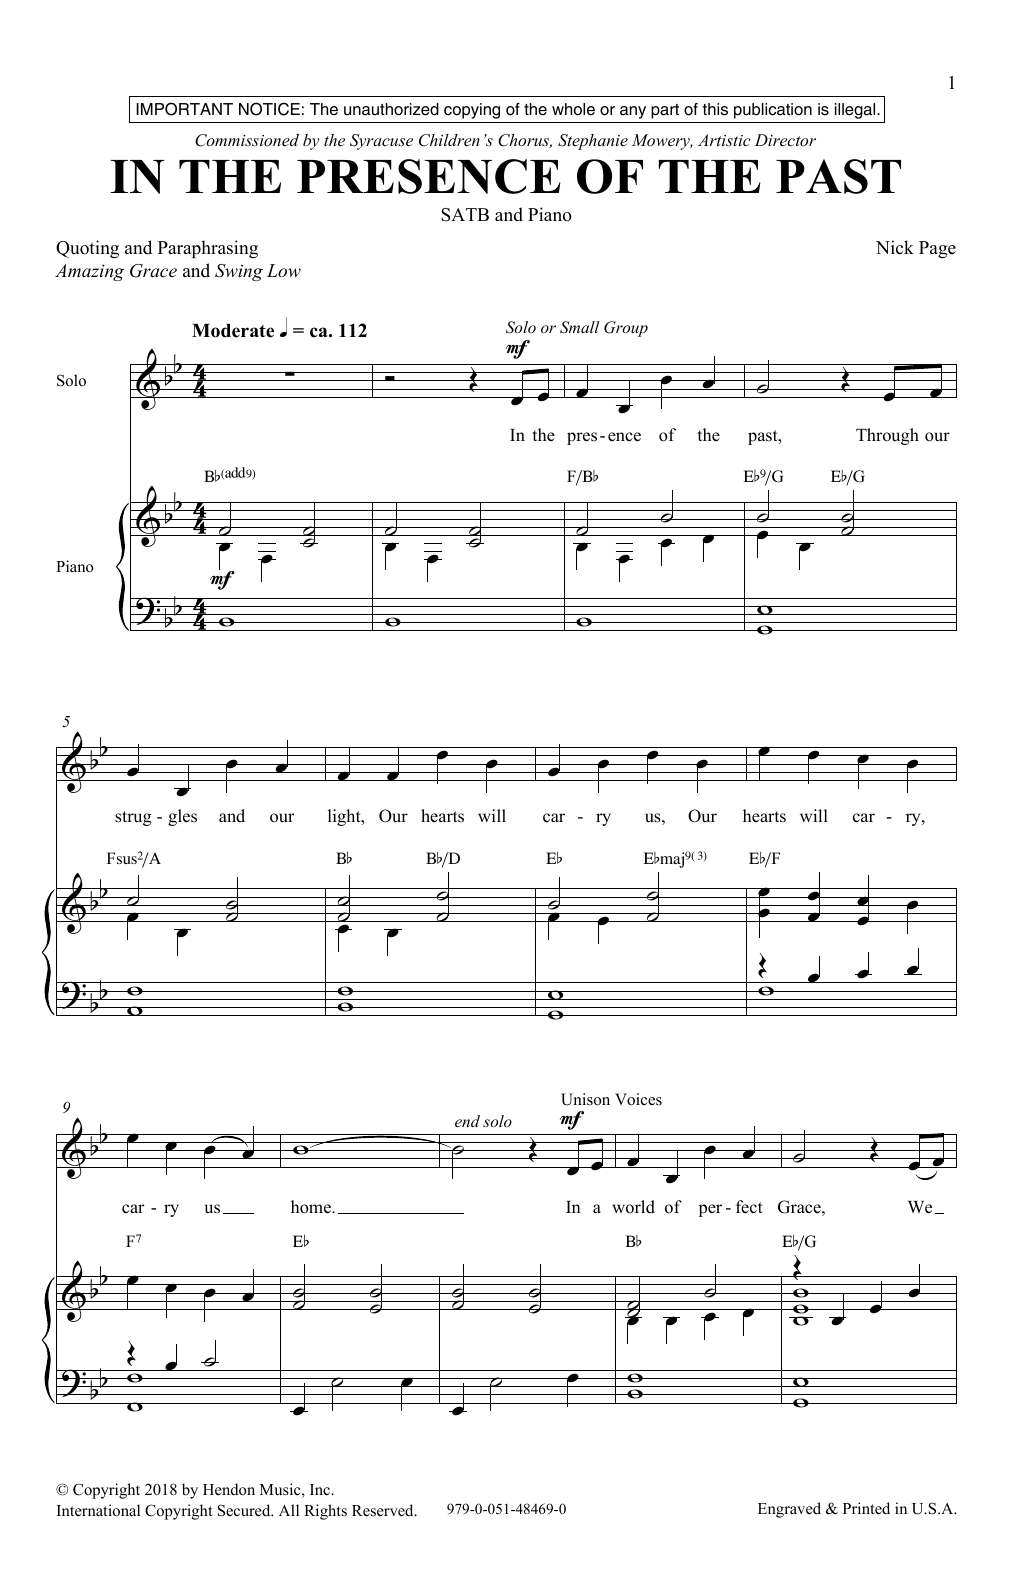 Download Nick Page In The Presence Of The Past Sheet Music